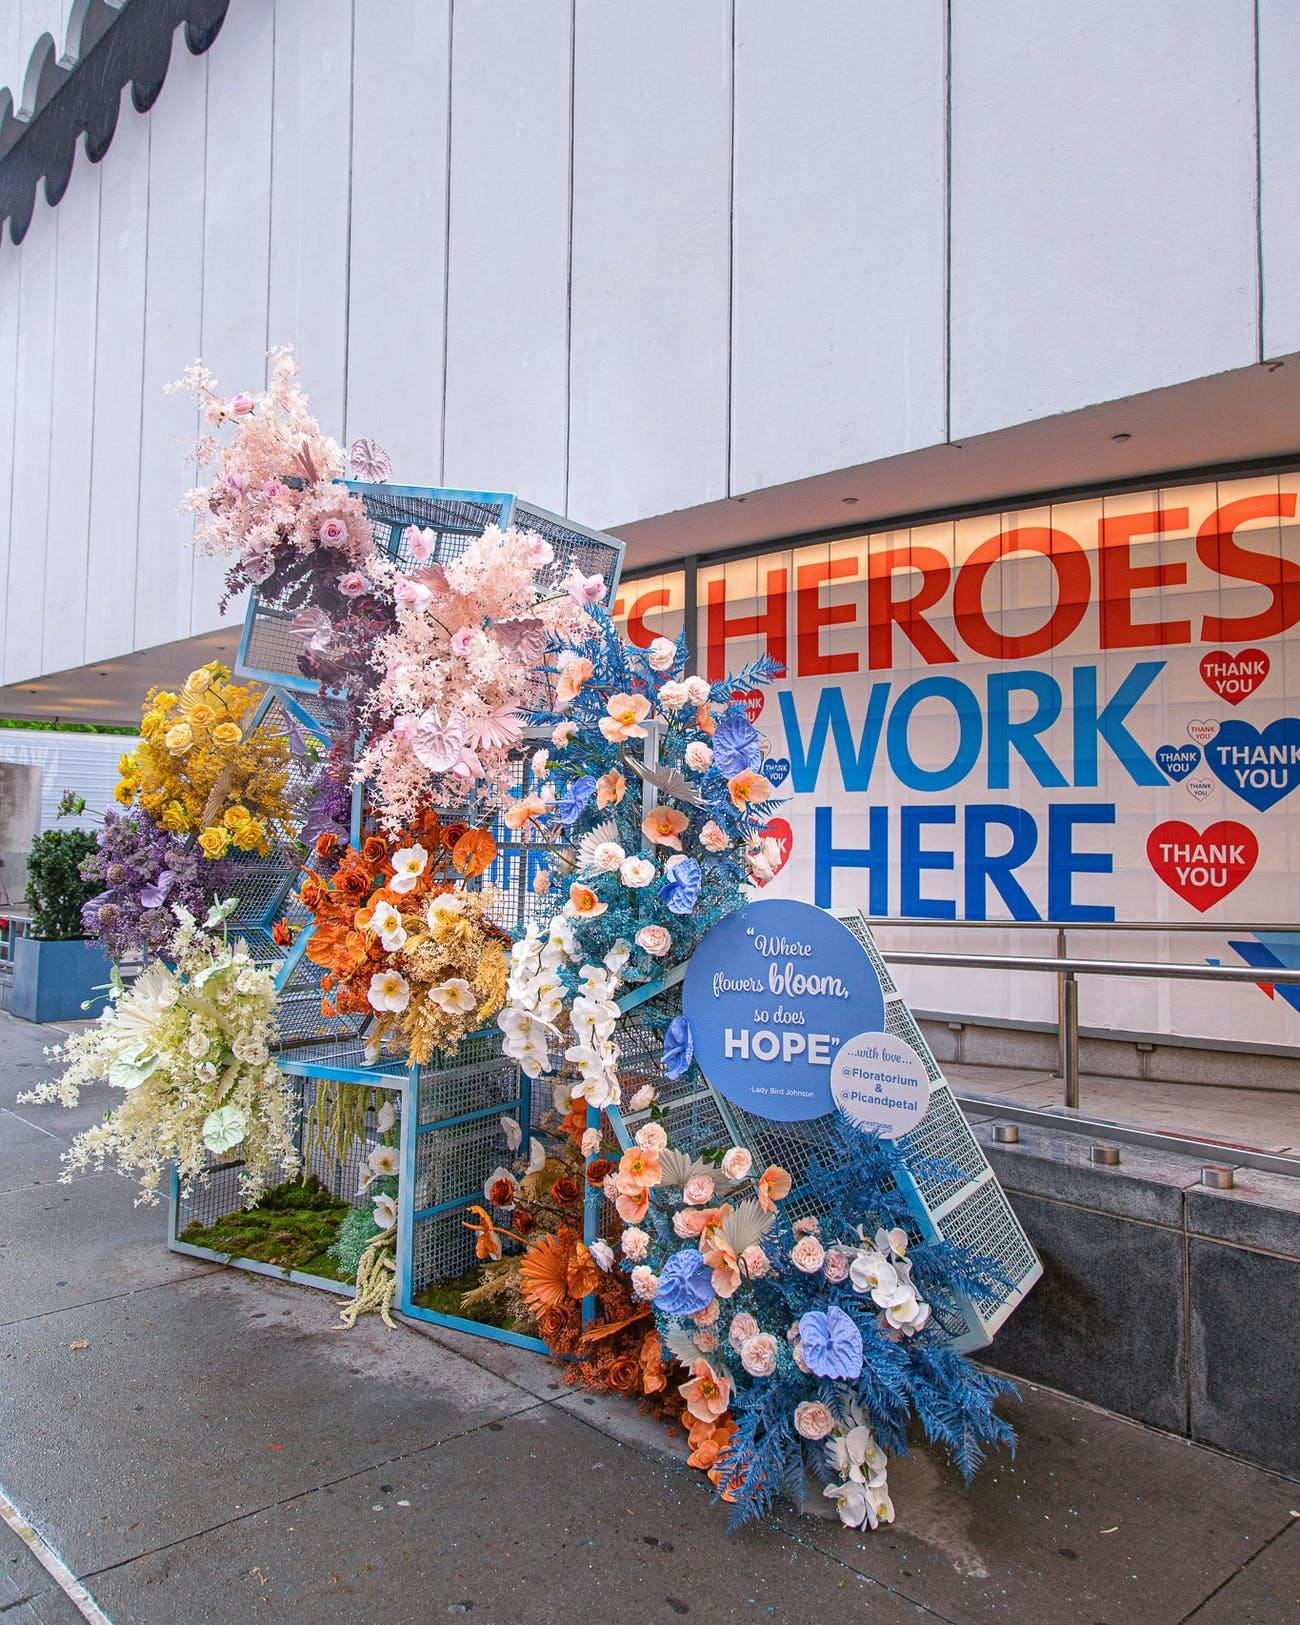 Flower installation in New York for Mothers who are Covid-19 heros | PartySlate